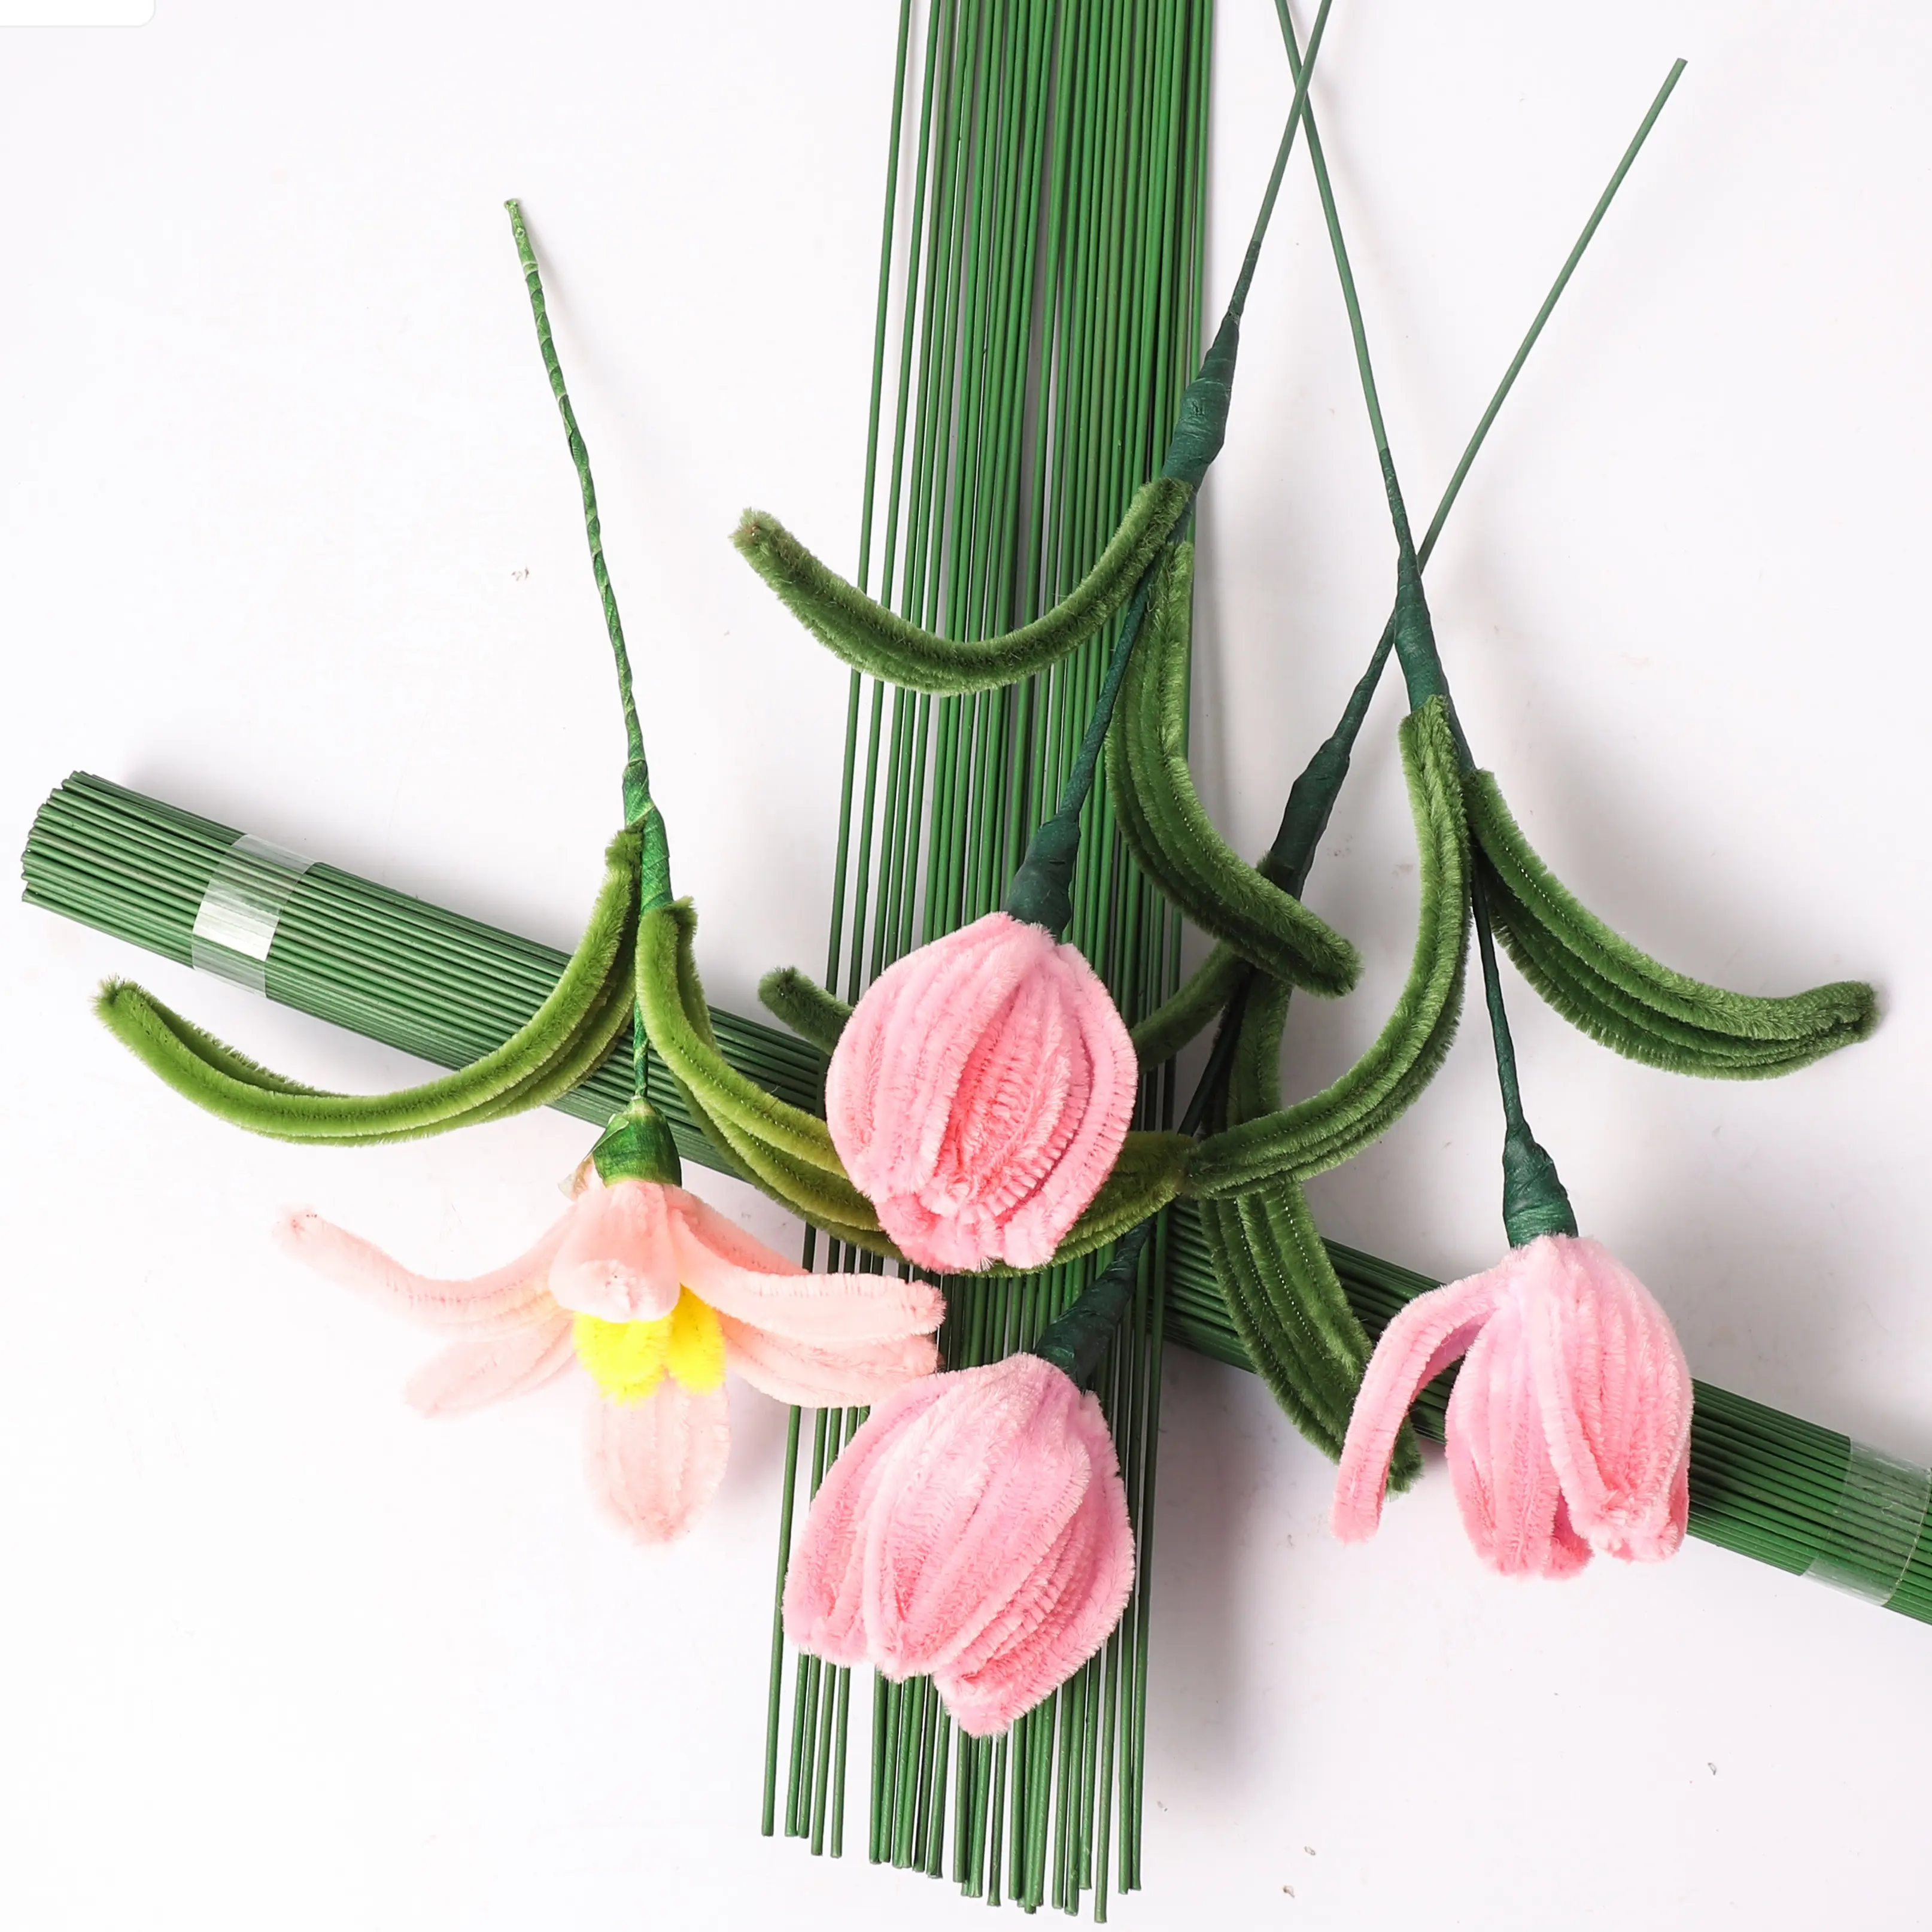 Customized bouquet of flowers pole stem wire for diy crafts and flower making